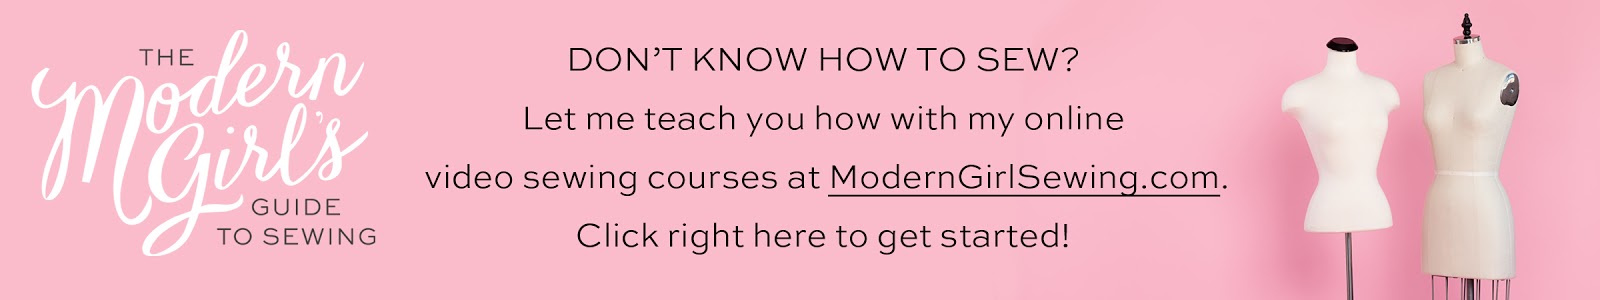 The Modern Girls guide to sewing